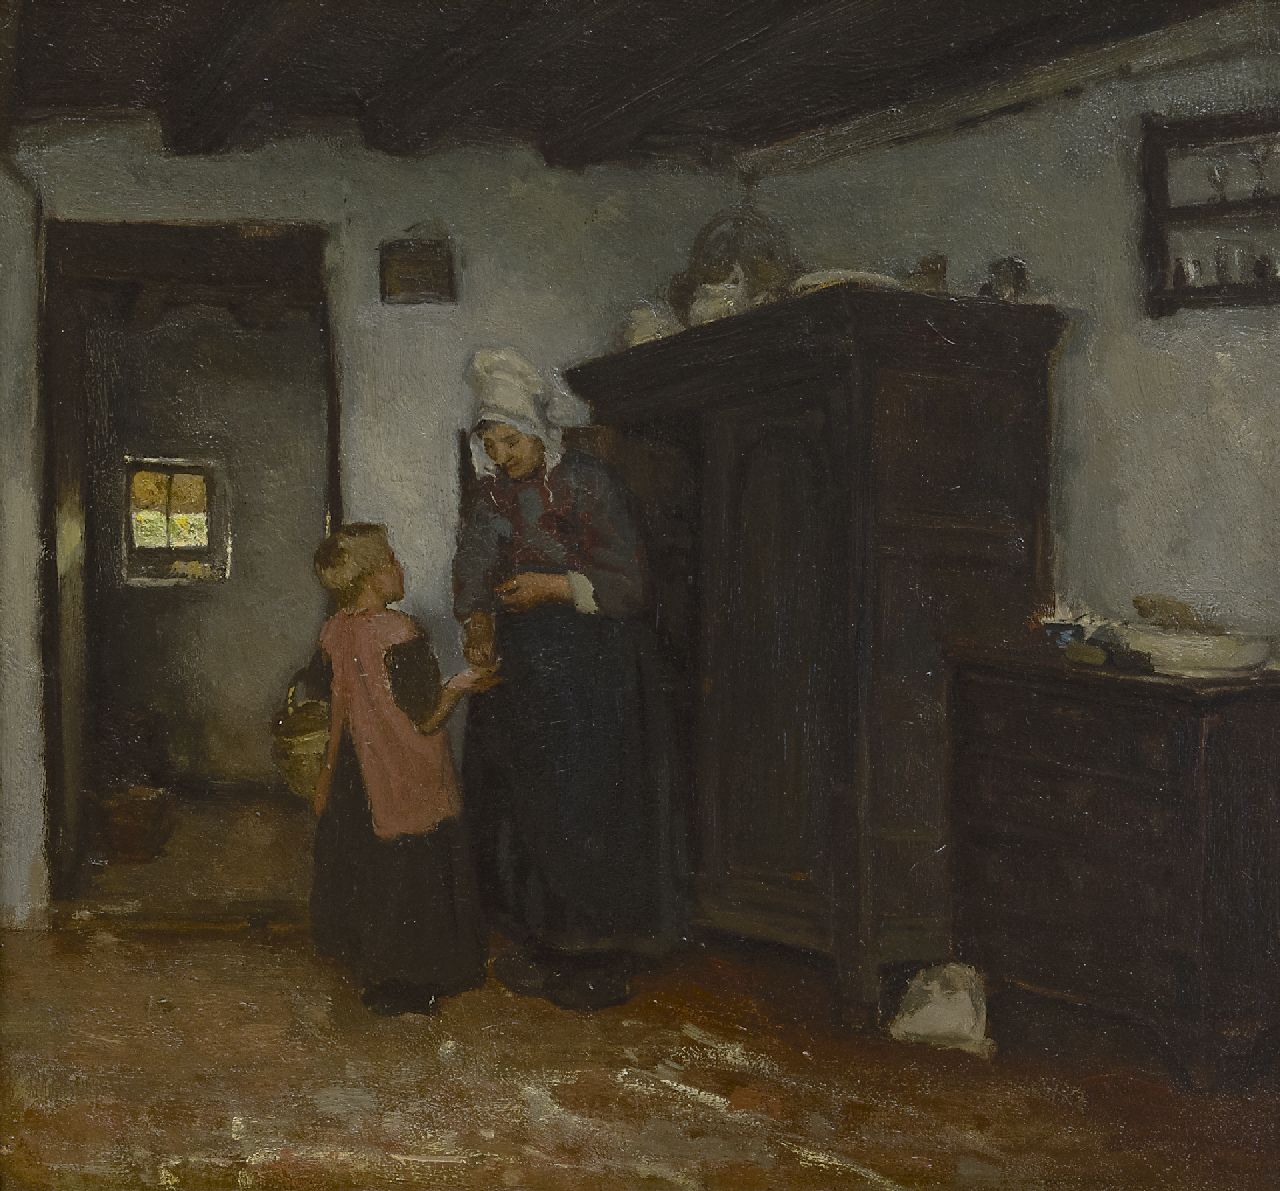 Neuhuys J.A.  | Johannes 'Albert' Neuhuys, A farm interior with a woman and child, oil on panel 40.4 x 43.7 cm, signed on a label on the reverse